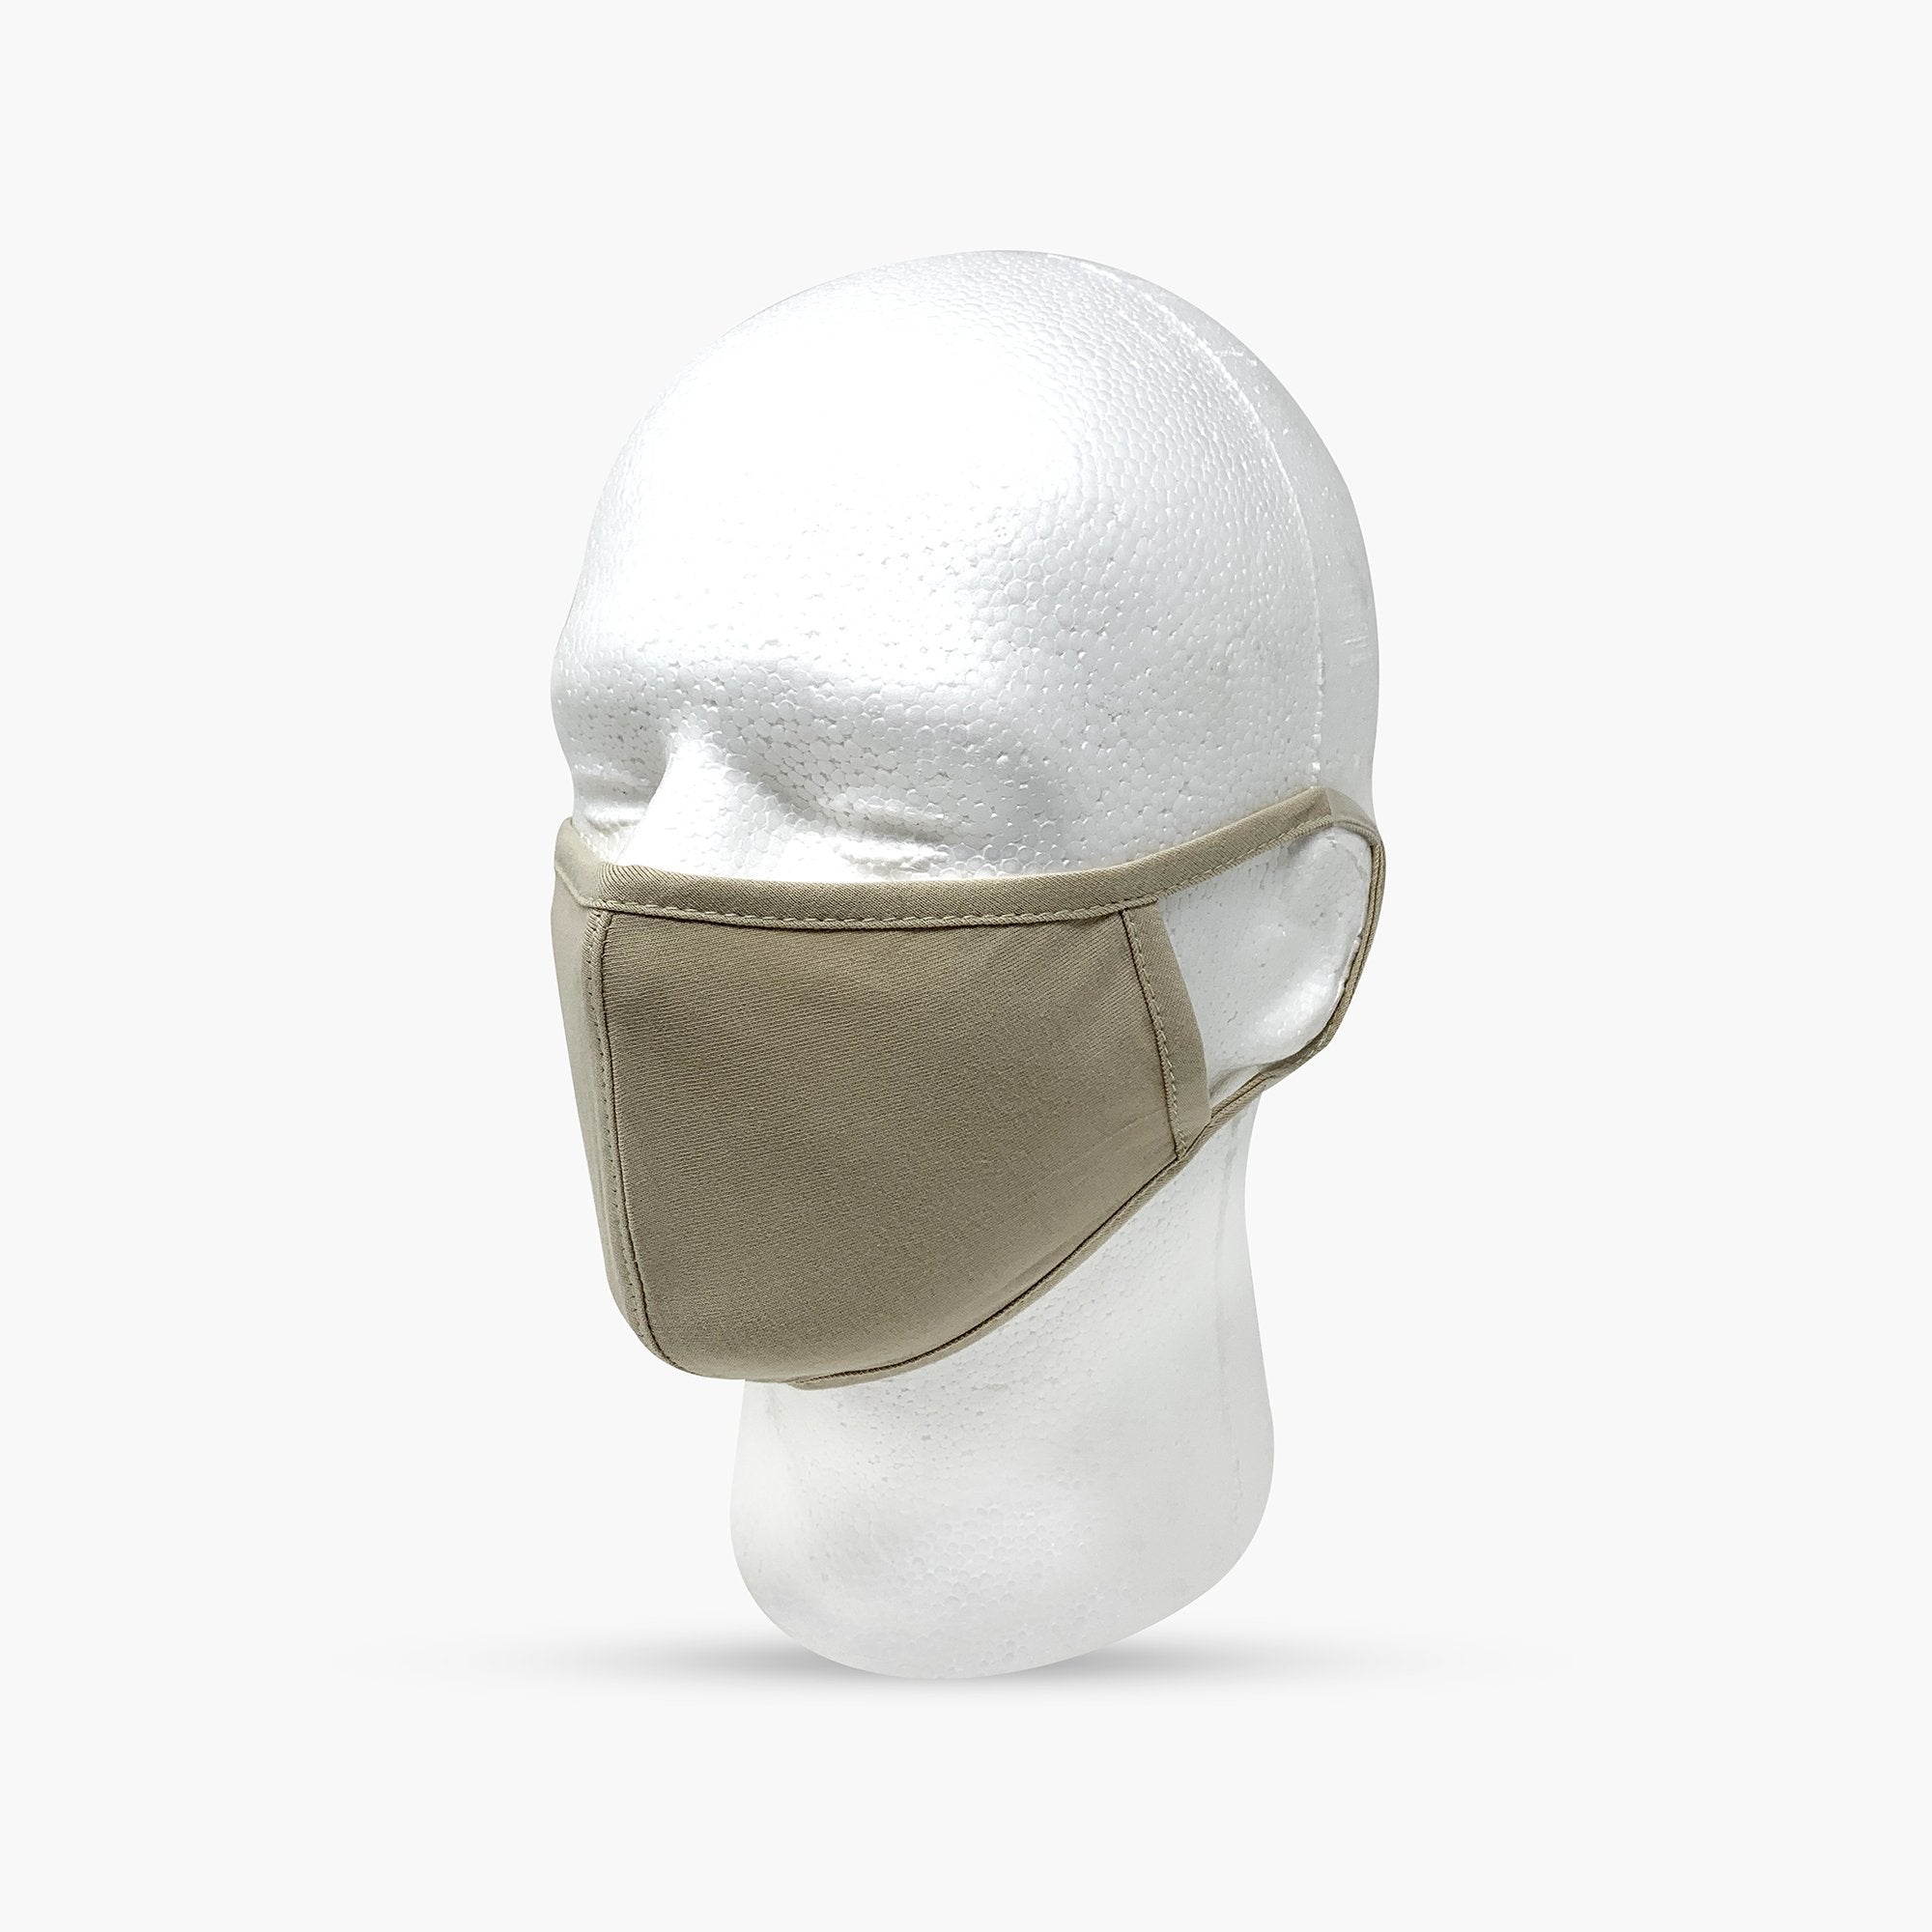 Cotton Reusable Off White Gents Rumal Face Mask, Number of Layers: 2 Layers